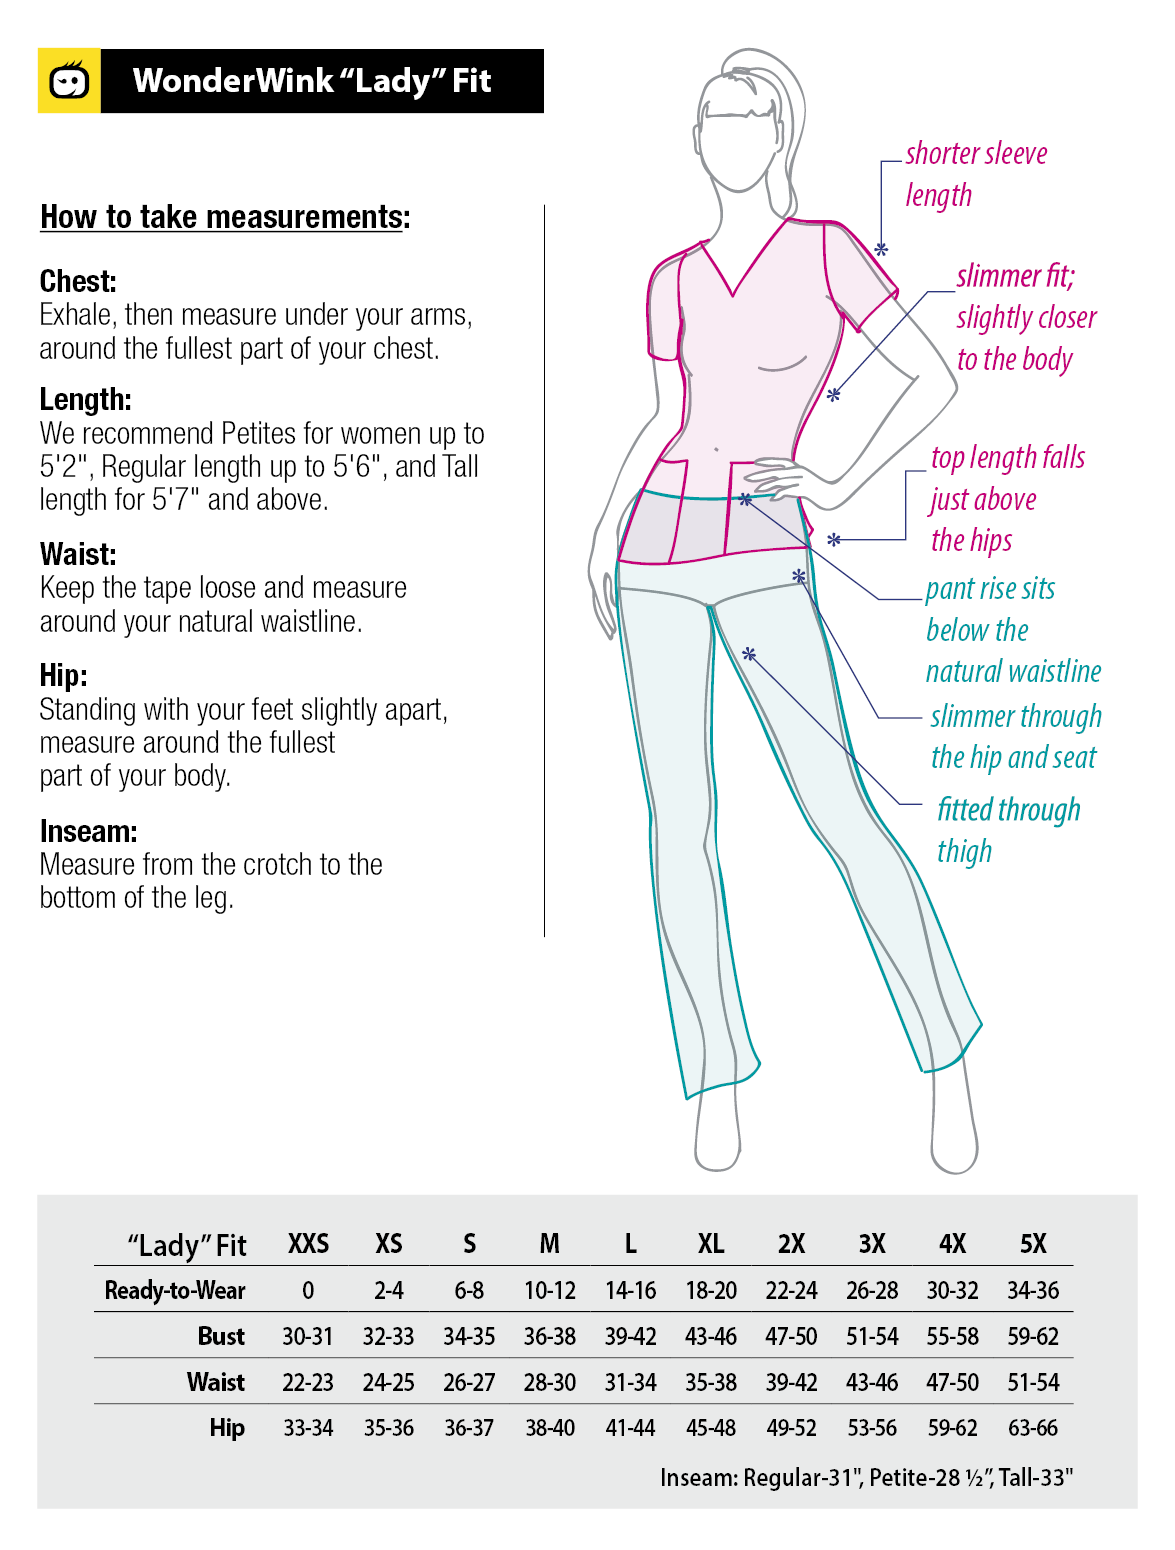 ww-sizechart-fit-guide-lady.png